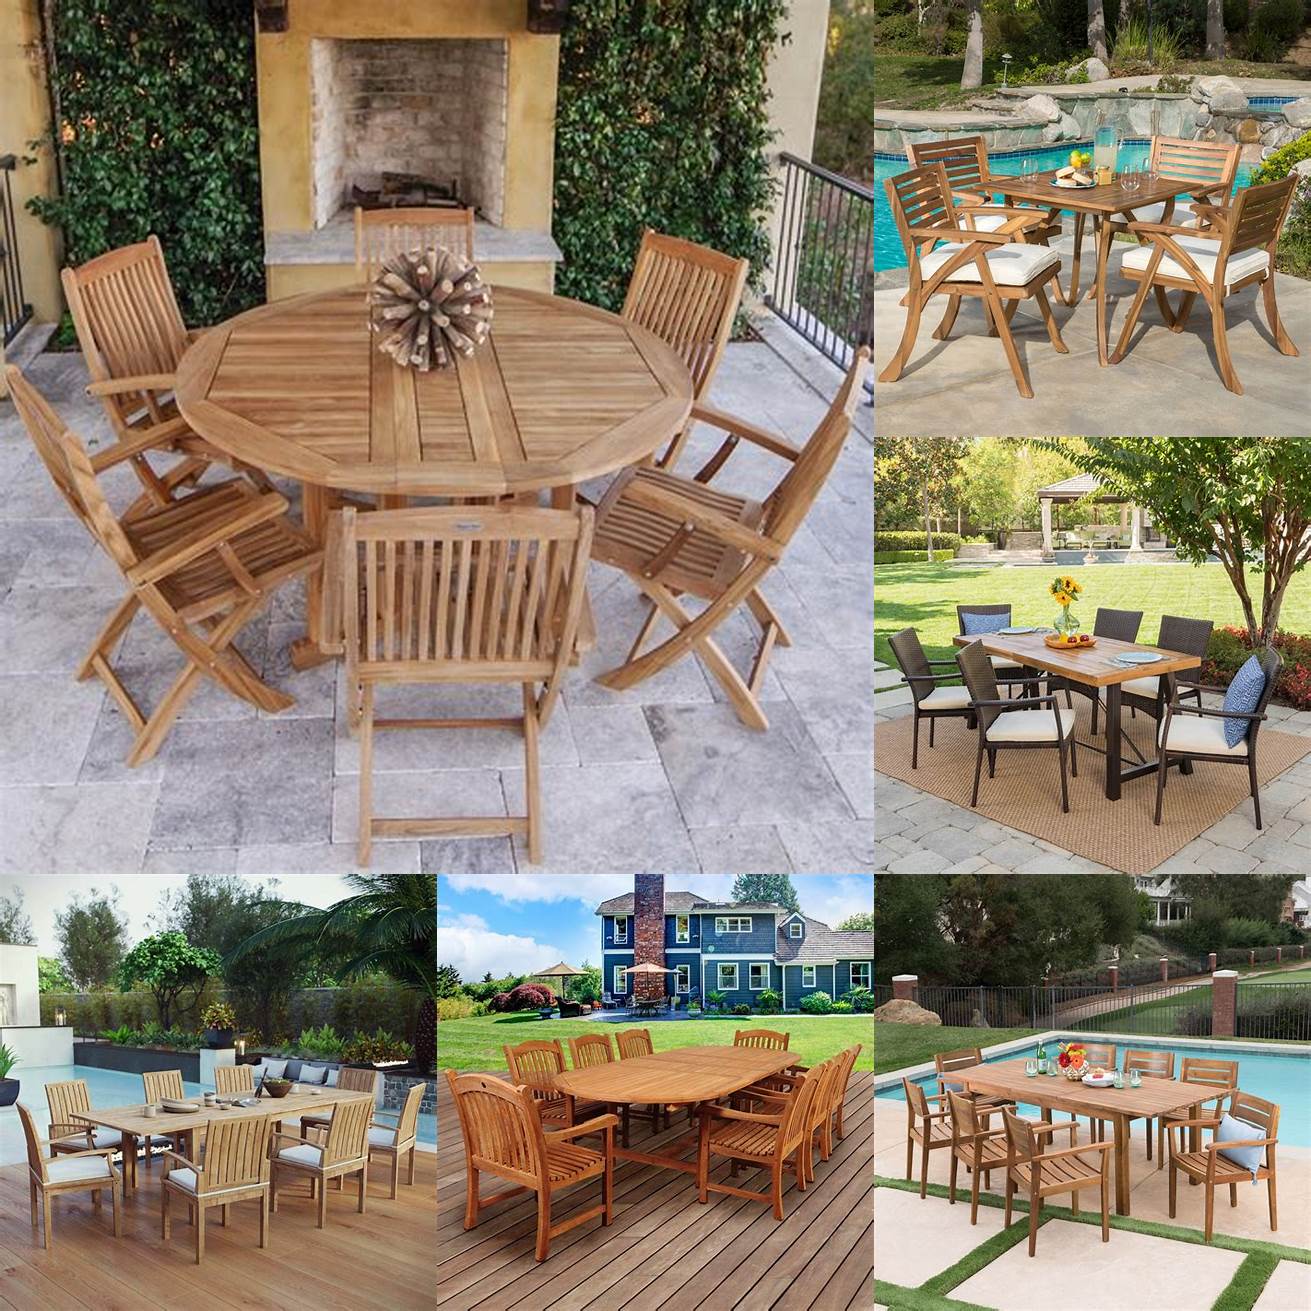 A stylish outdoor patio with a Java teak outdoor dining set